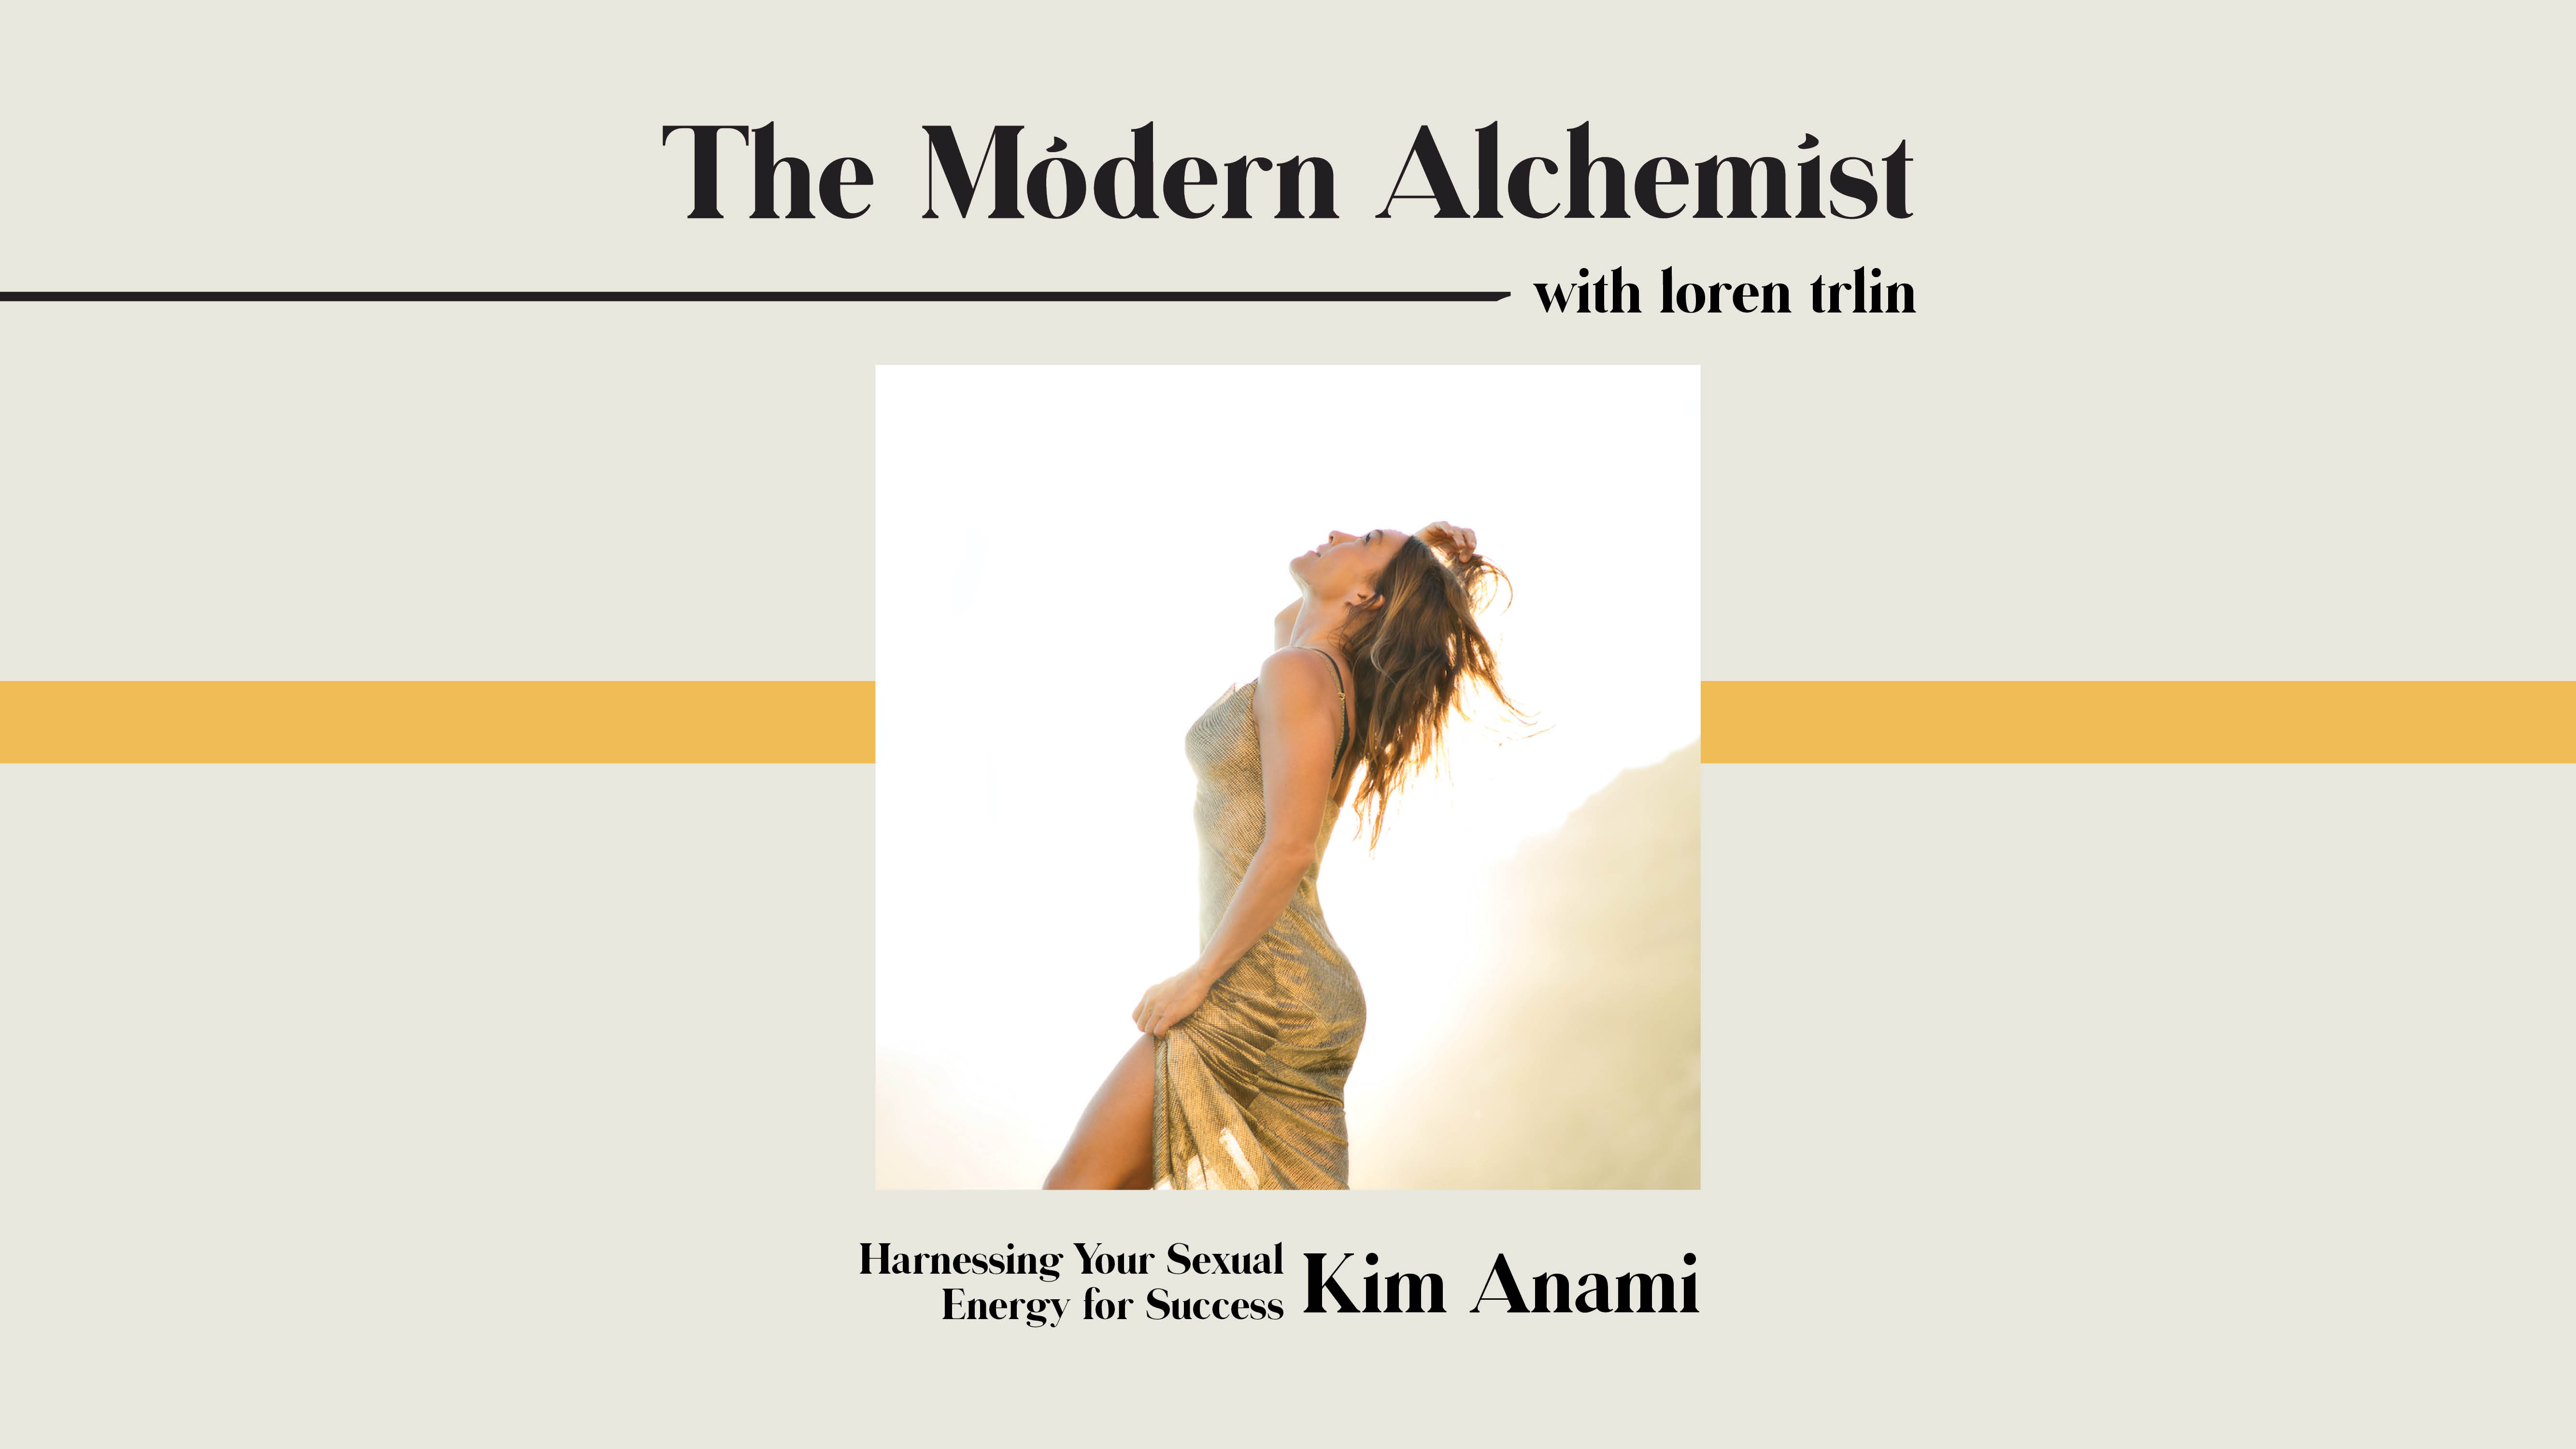 Harnessing your Sexual Energy for Success with Kim Anami - Loren Trlin.